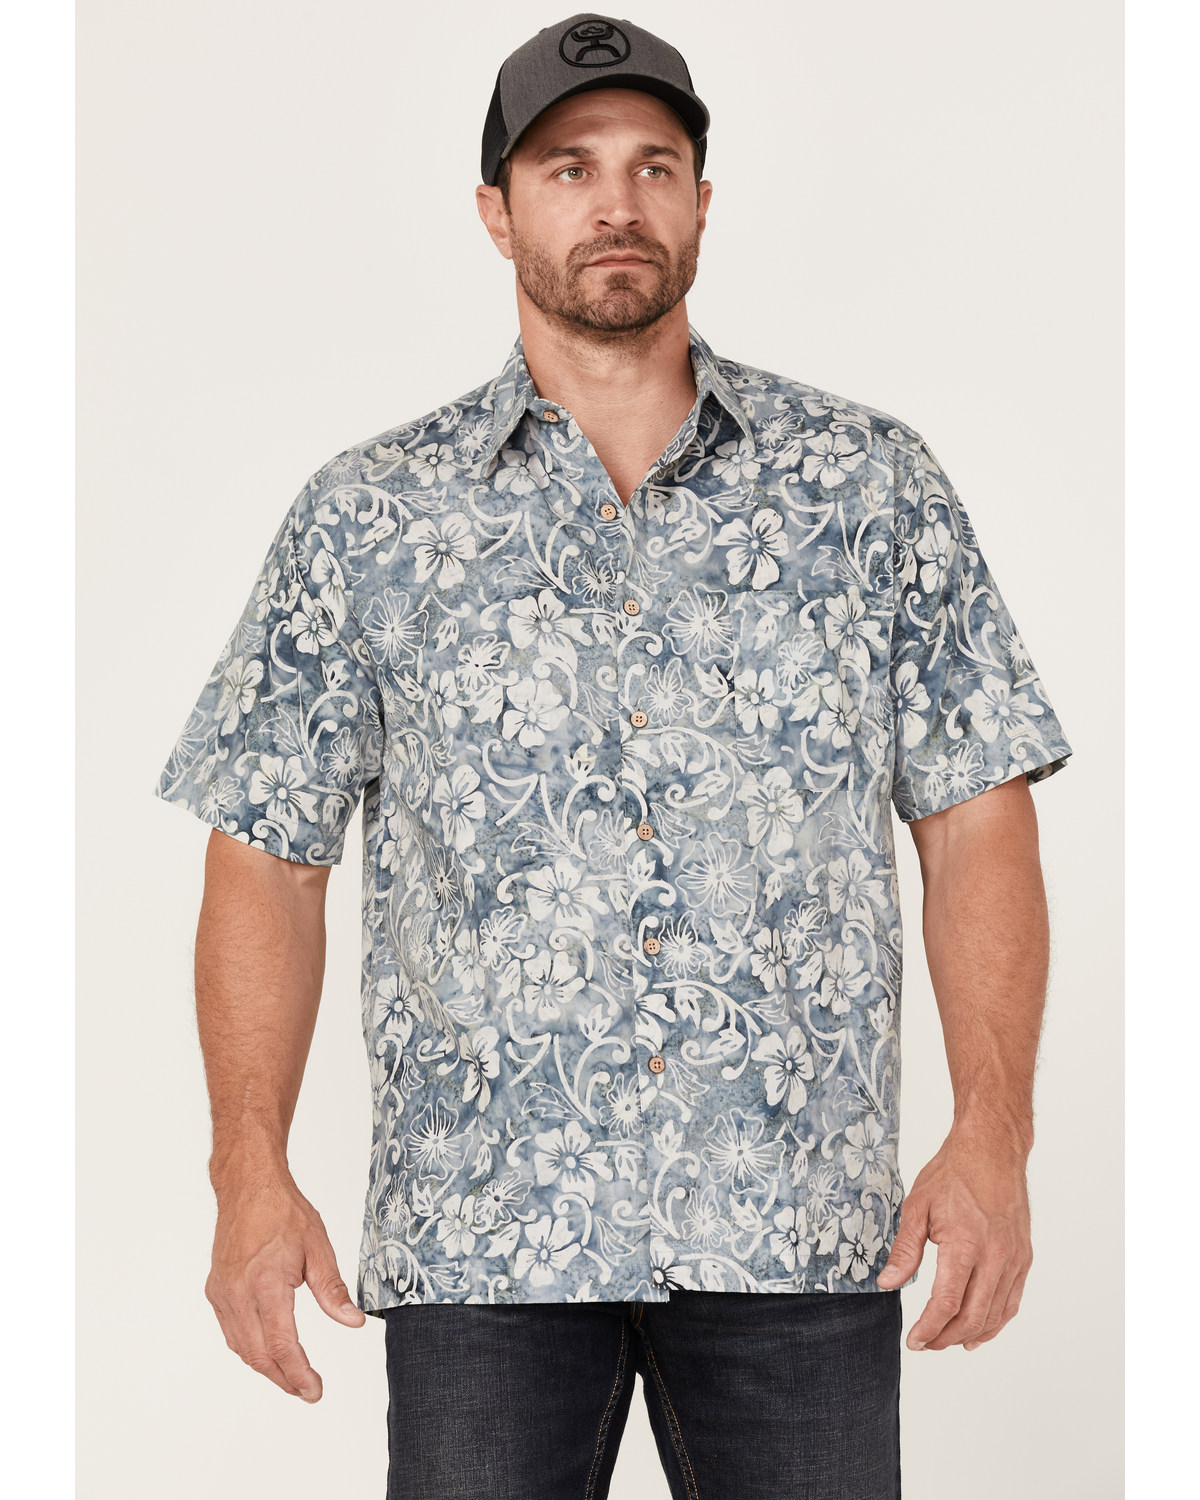 Scully Men's Floral Print Short Sleeve Button Down Western Shirt